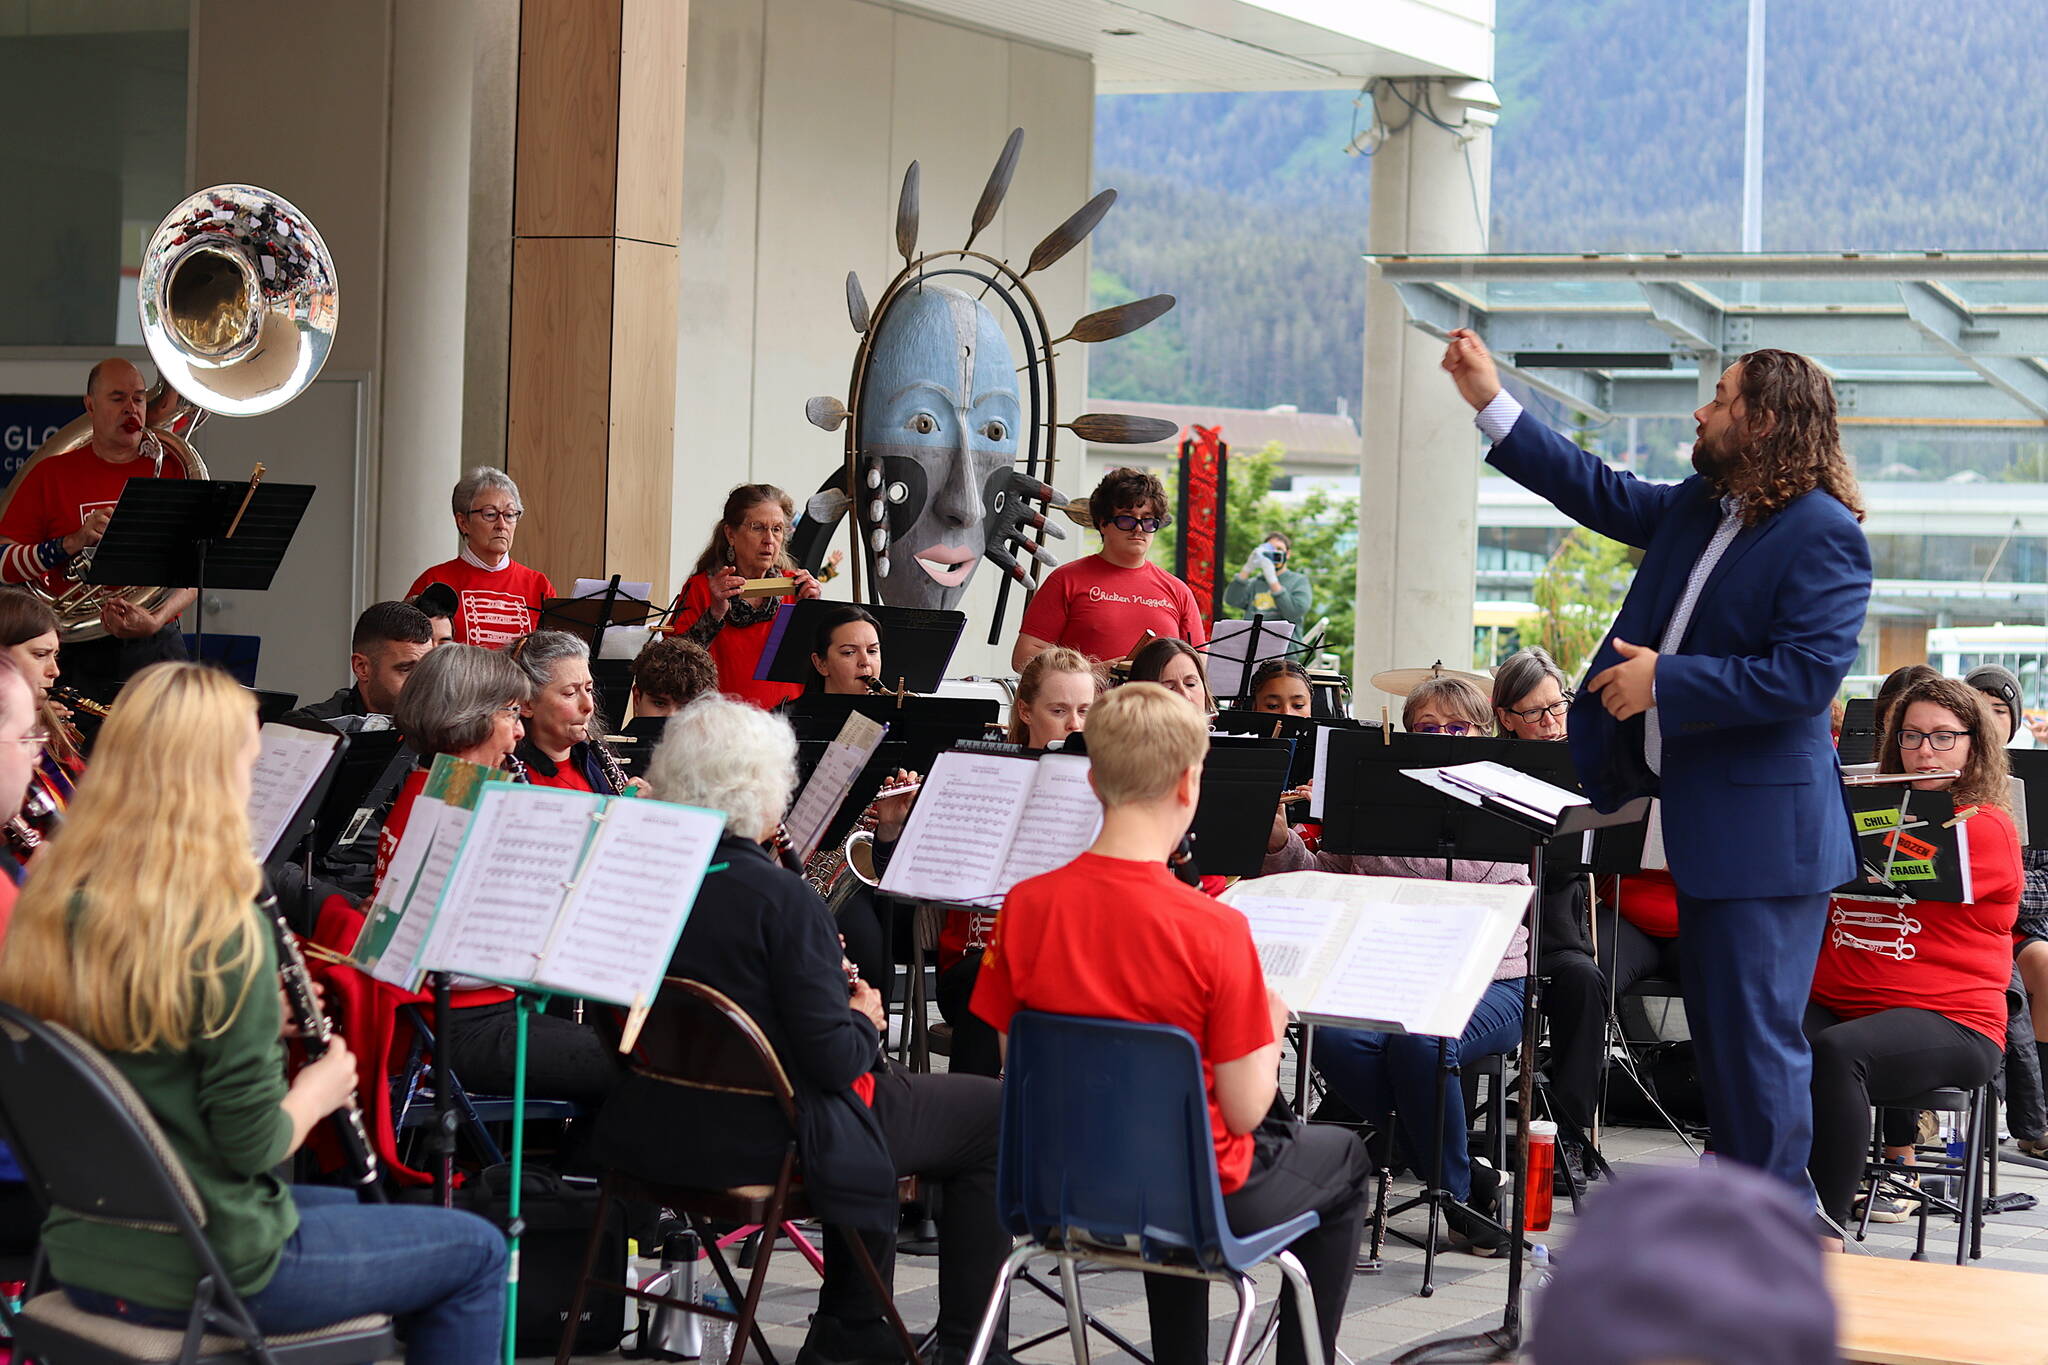 Mark Sabbatini / Juneau Empire
T.J. Hovest conducts the Juneau Volunteer Marching Band during an Independence Day weekend concert on Sunday at Sealaska Heritage Plaza.